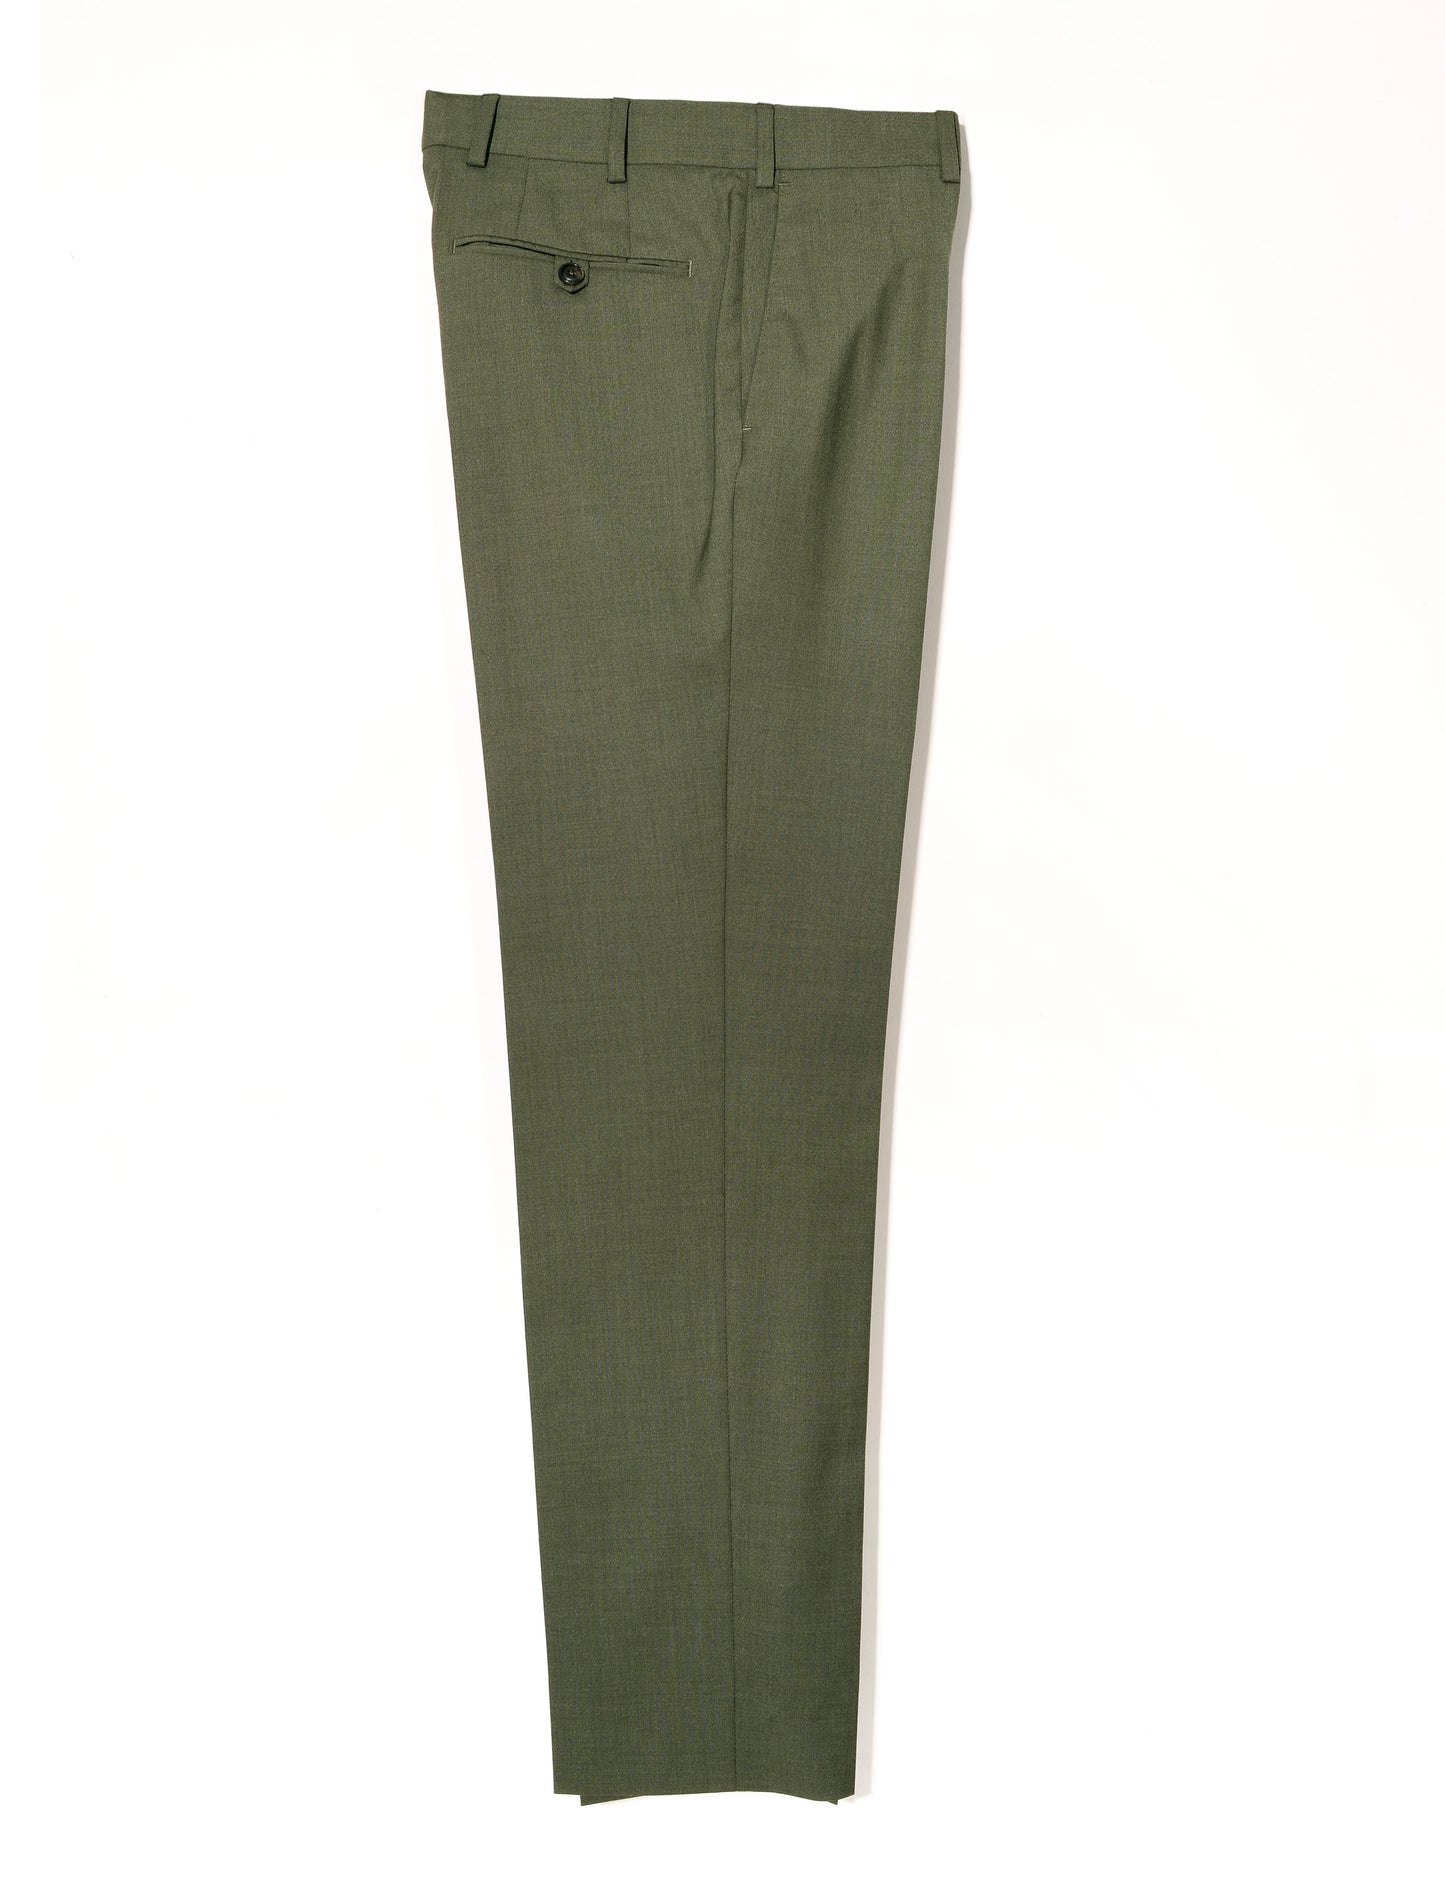 BKT50 Tailored Trousers in 14.5 Micron Mouliné - Agave Green